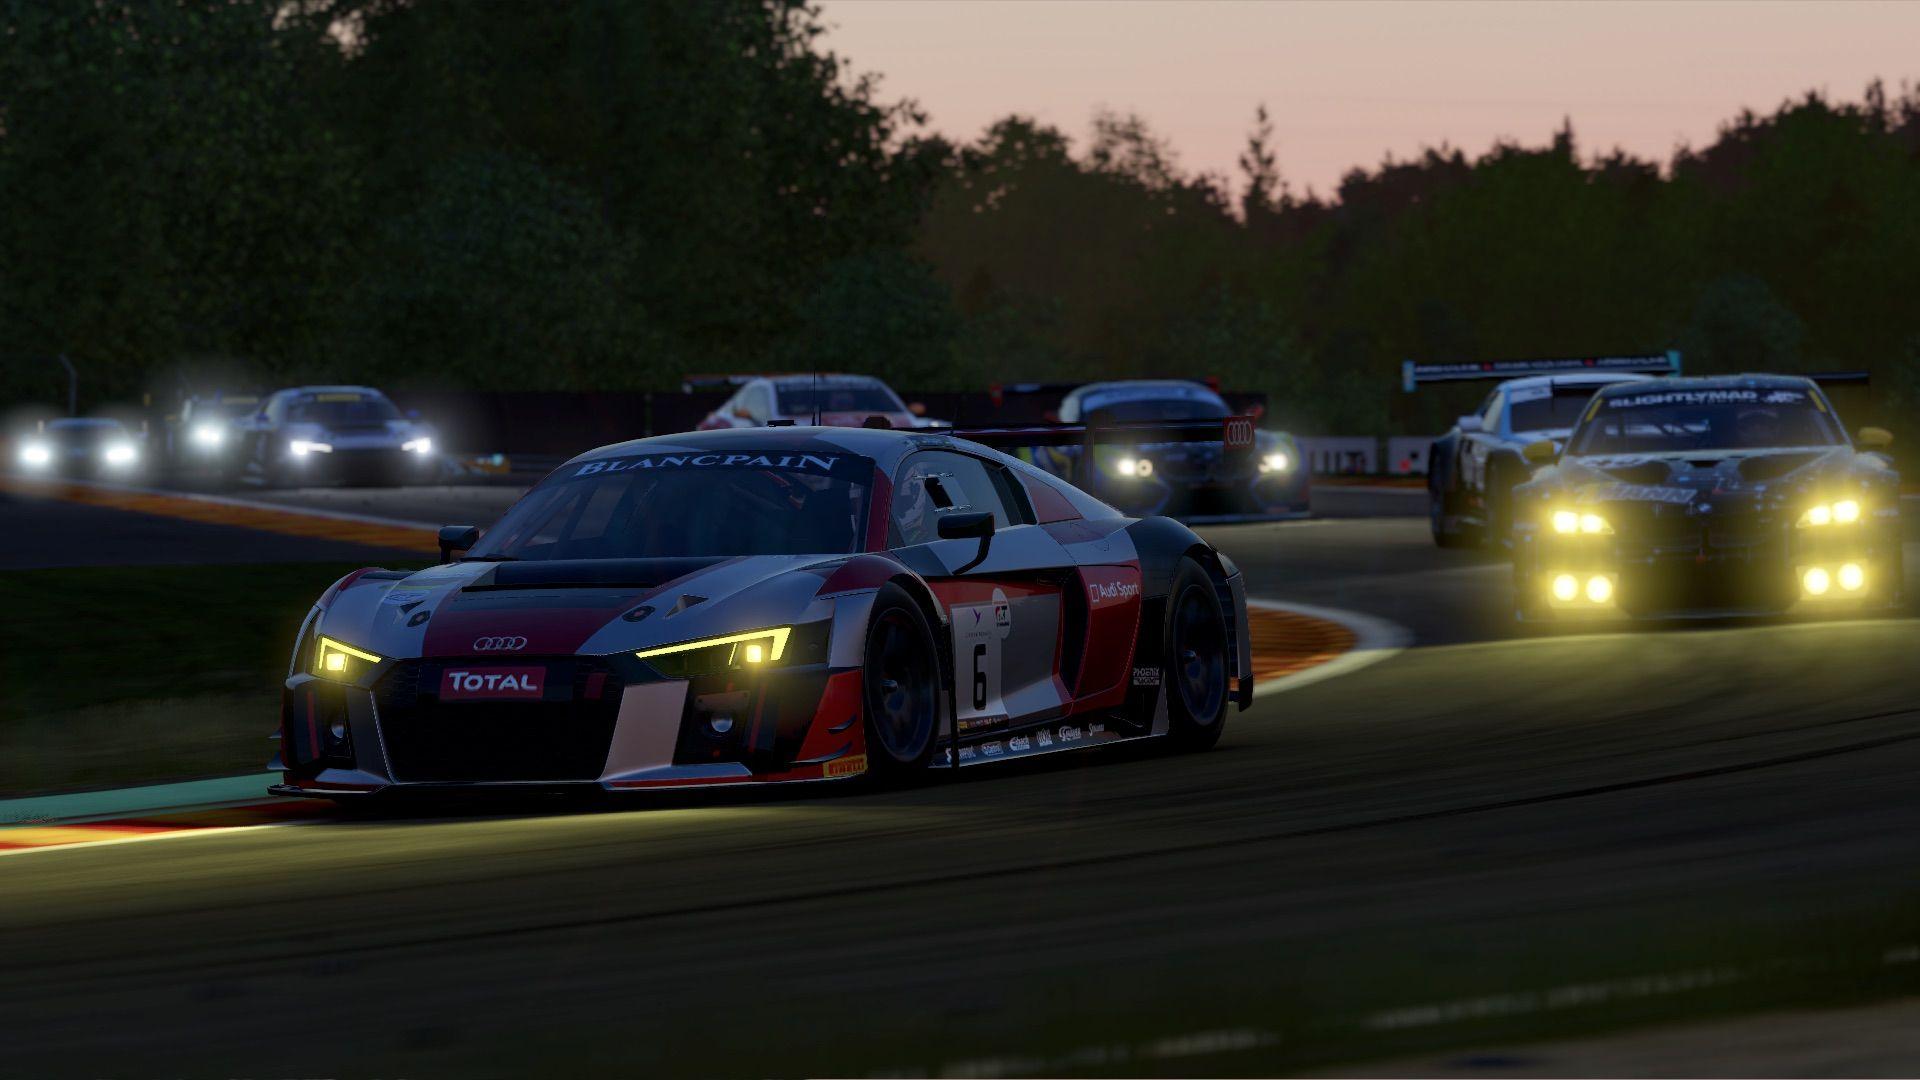 93 Latest Project cars changing desktop wallpaper for Home Screen Wallpaper